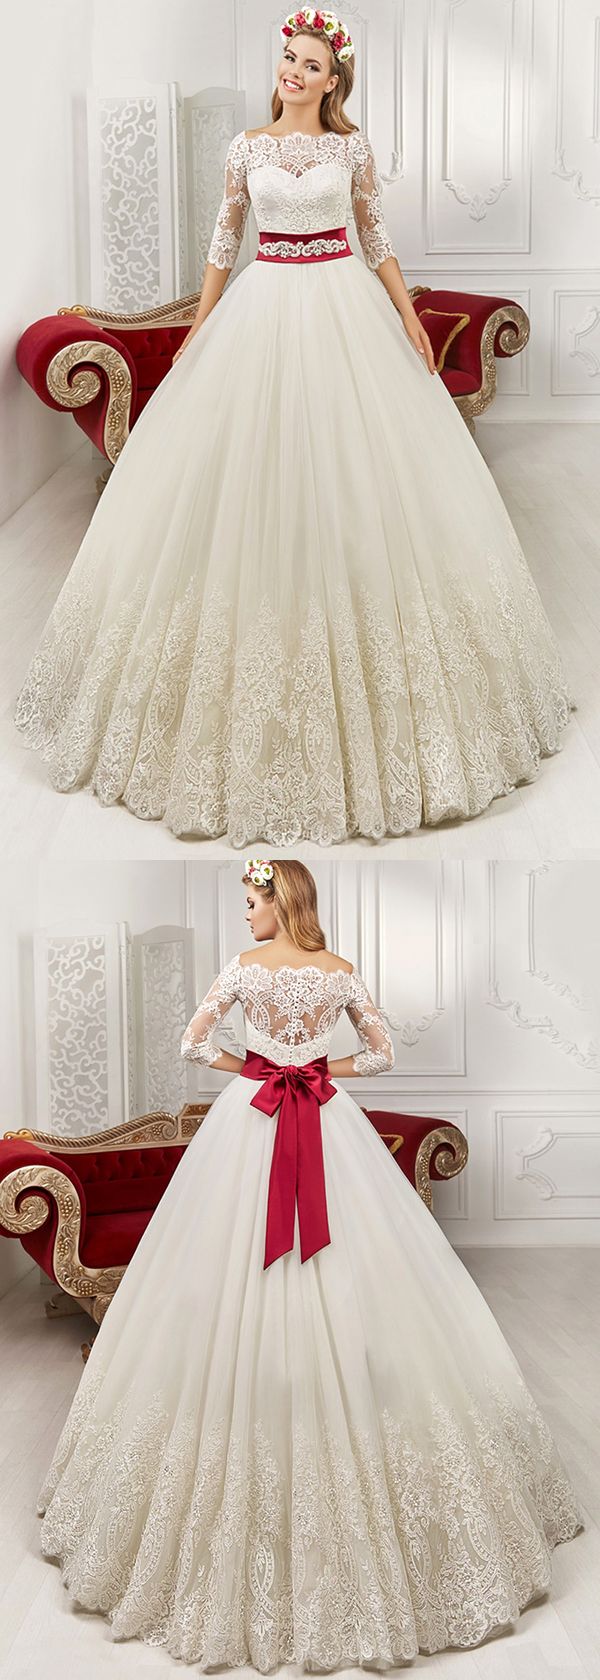 pretty wedding dresses with bows